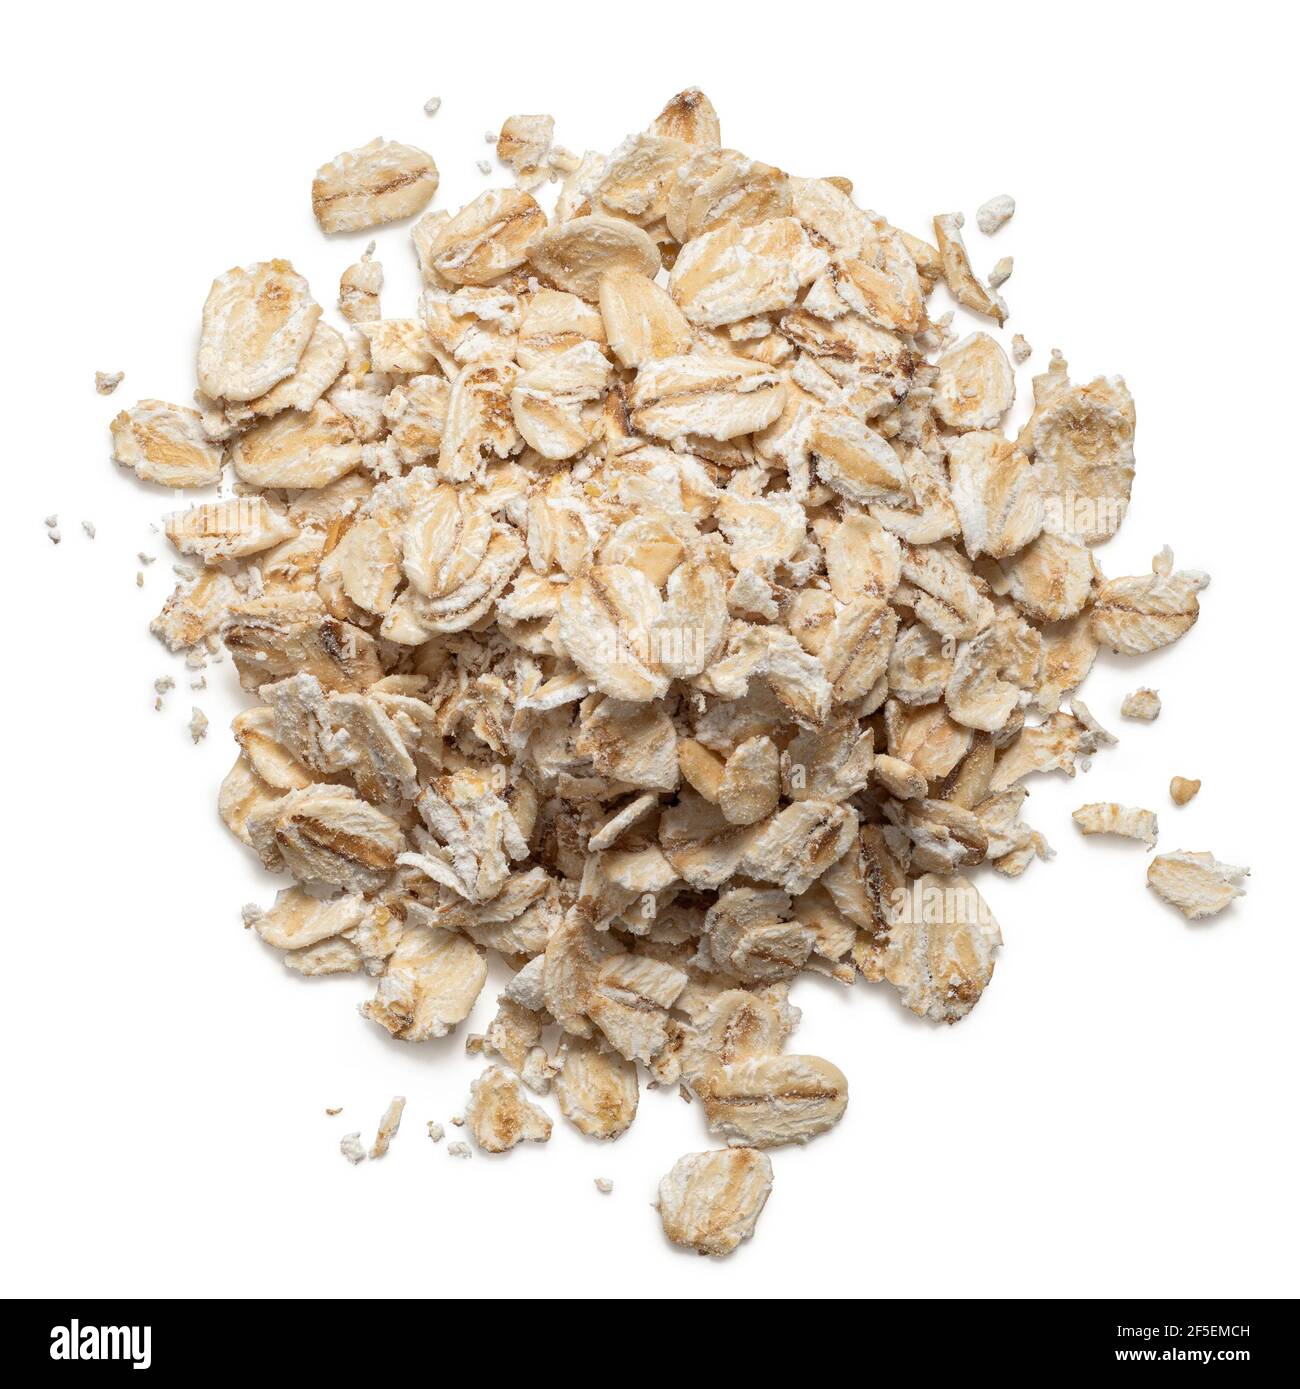 Pile of uncooked porridge oats isolated on white. Top view. Stock Photo